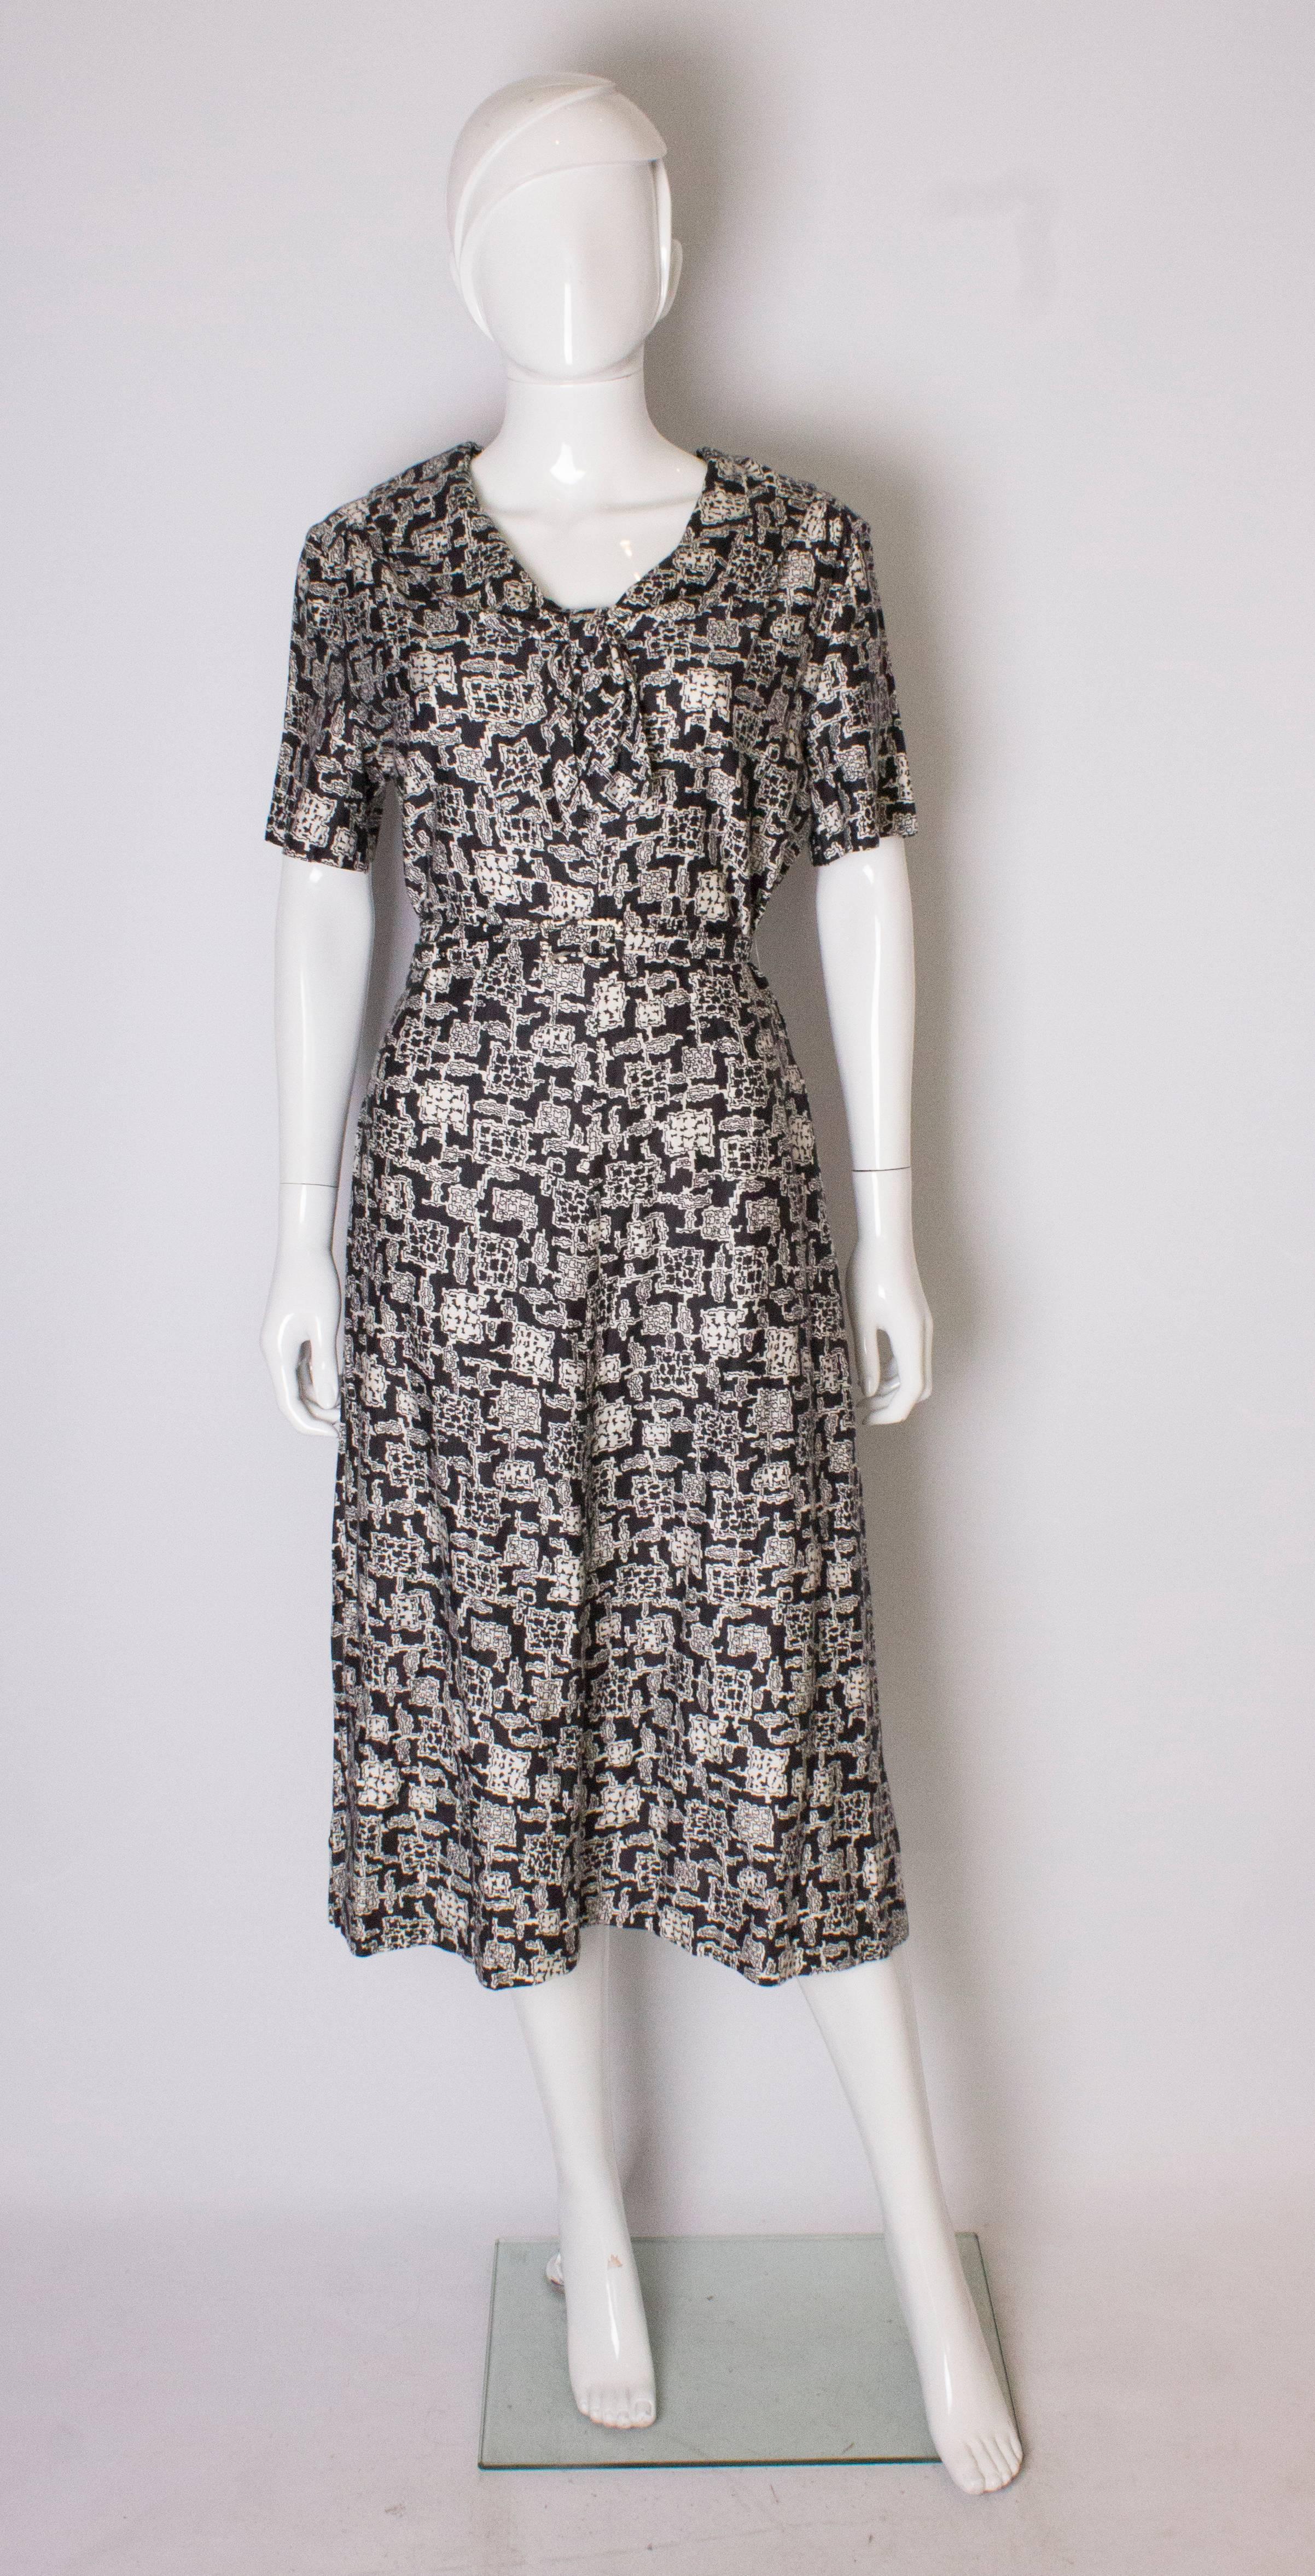 A stylish black and white printed vintage day dress by Horrockses .The dress has a v neckline with bow detail,  a self fabric belt at the waist, and central zip at the back. It is unlined. Bust up to 39'' ,length 47''